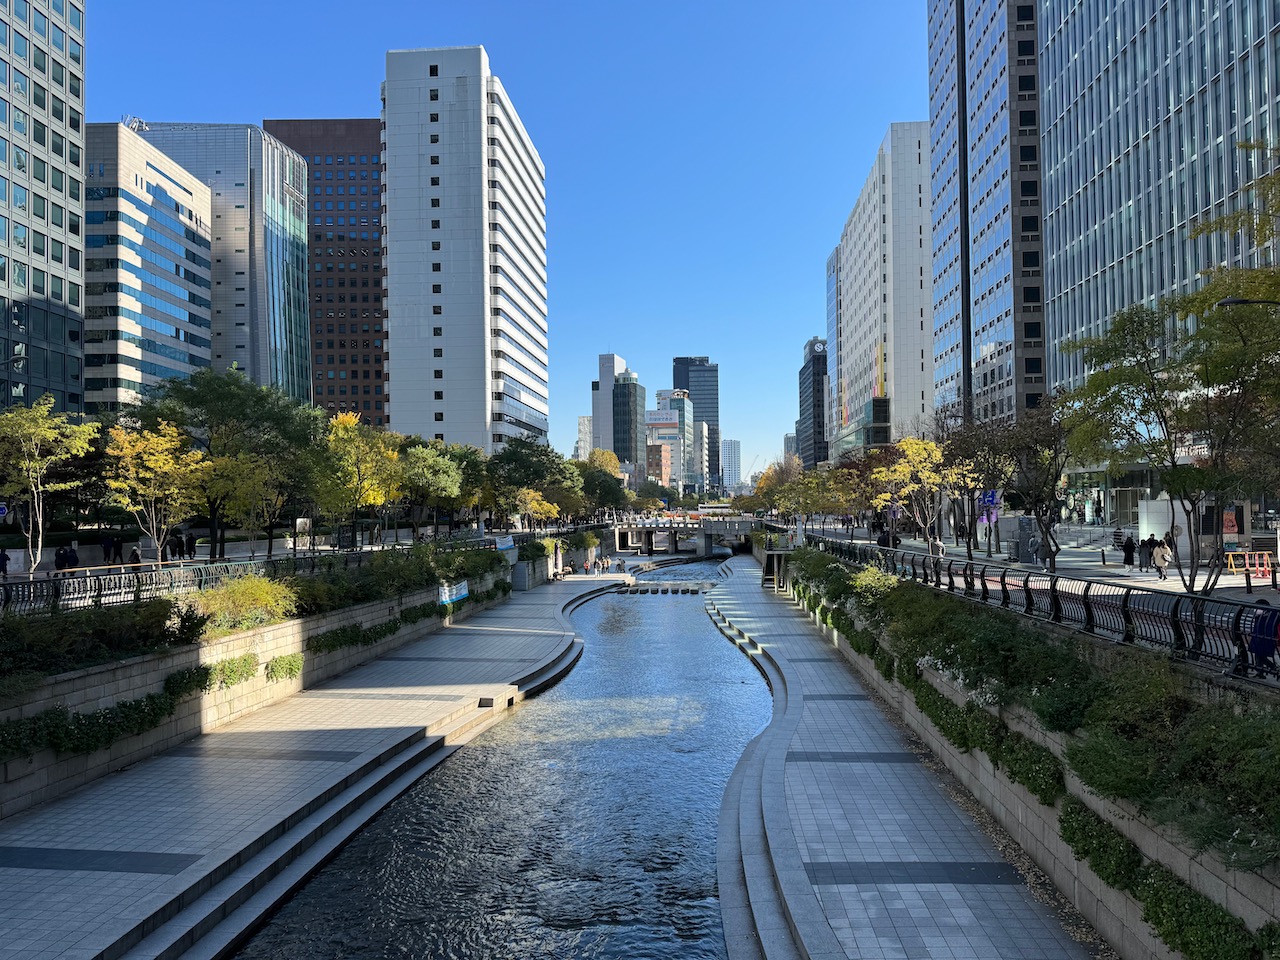 Cheonggyecheon, a park where a highway used to be